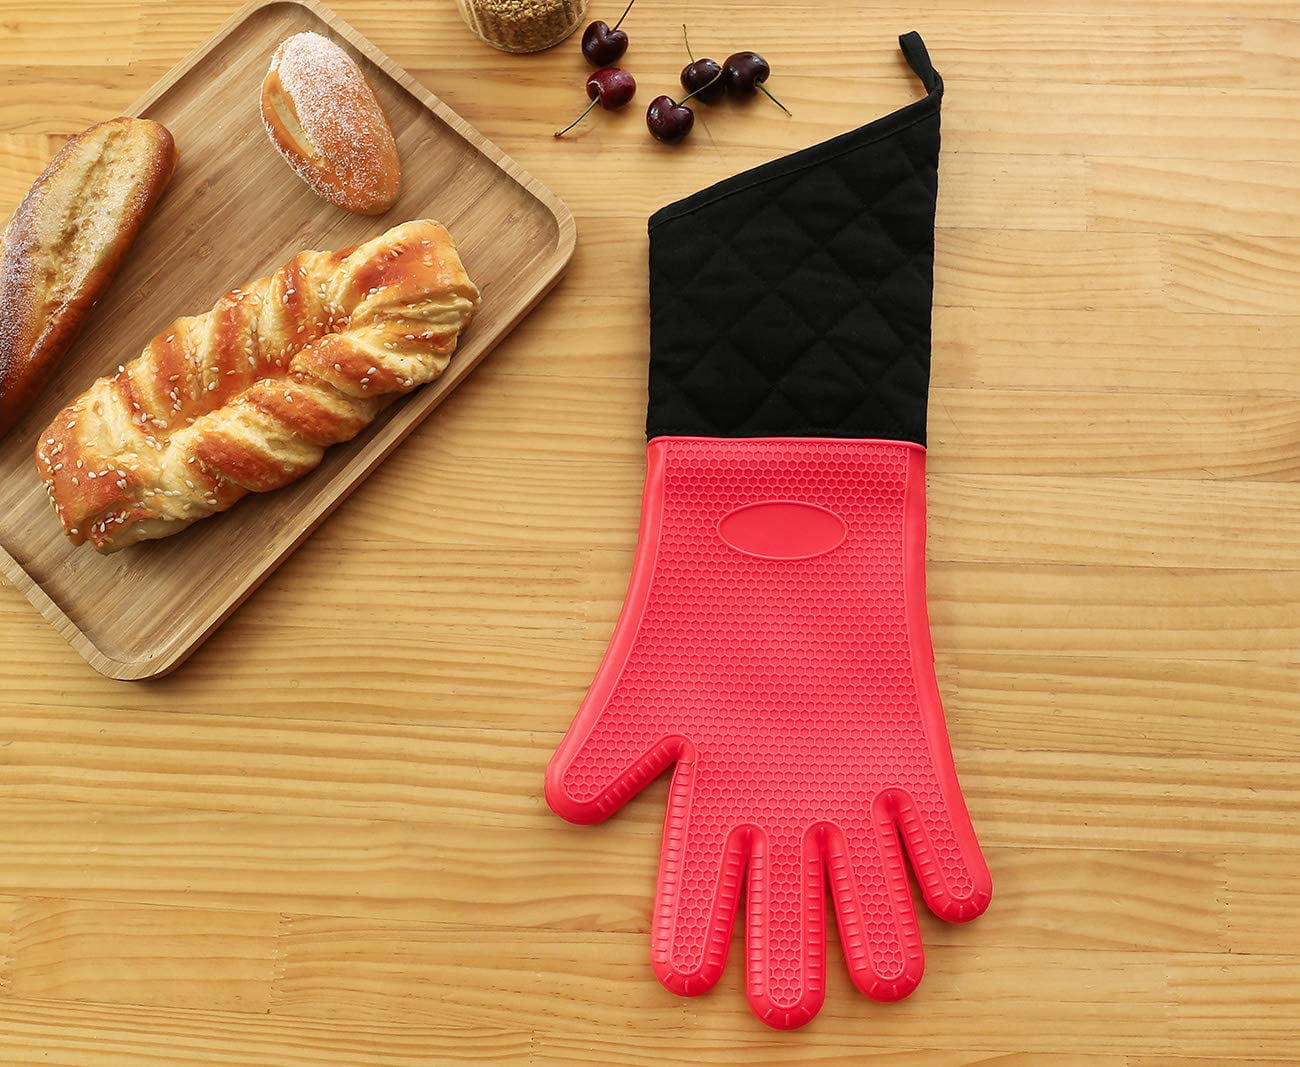 1 Pair 18 Inch Camkuzon Silicone Oven Mitts Extra Long Heat Resistant Oven Gloves for Baking Soft Cotton Liner Waterproof Non-Slip Cooking Red Grilling 